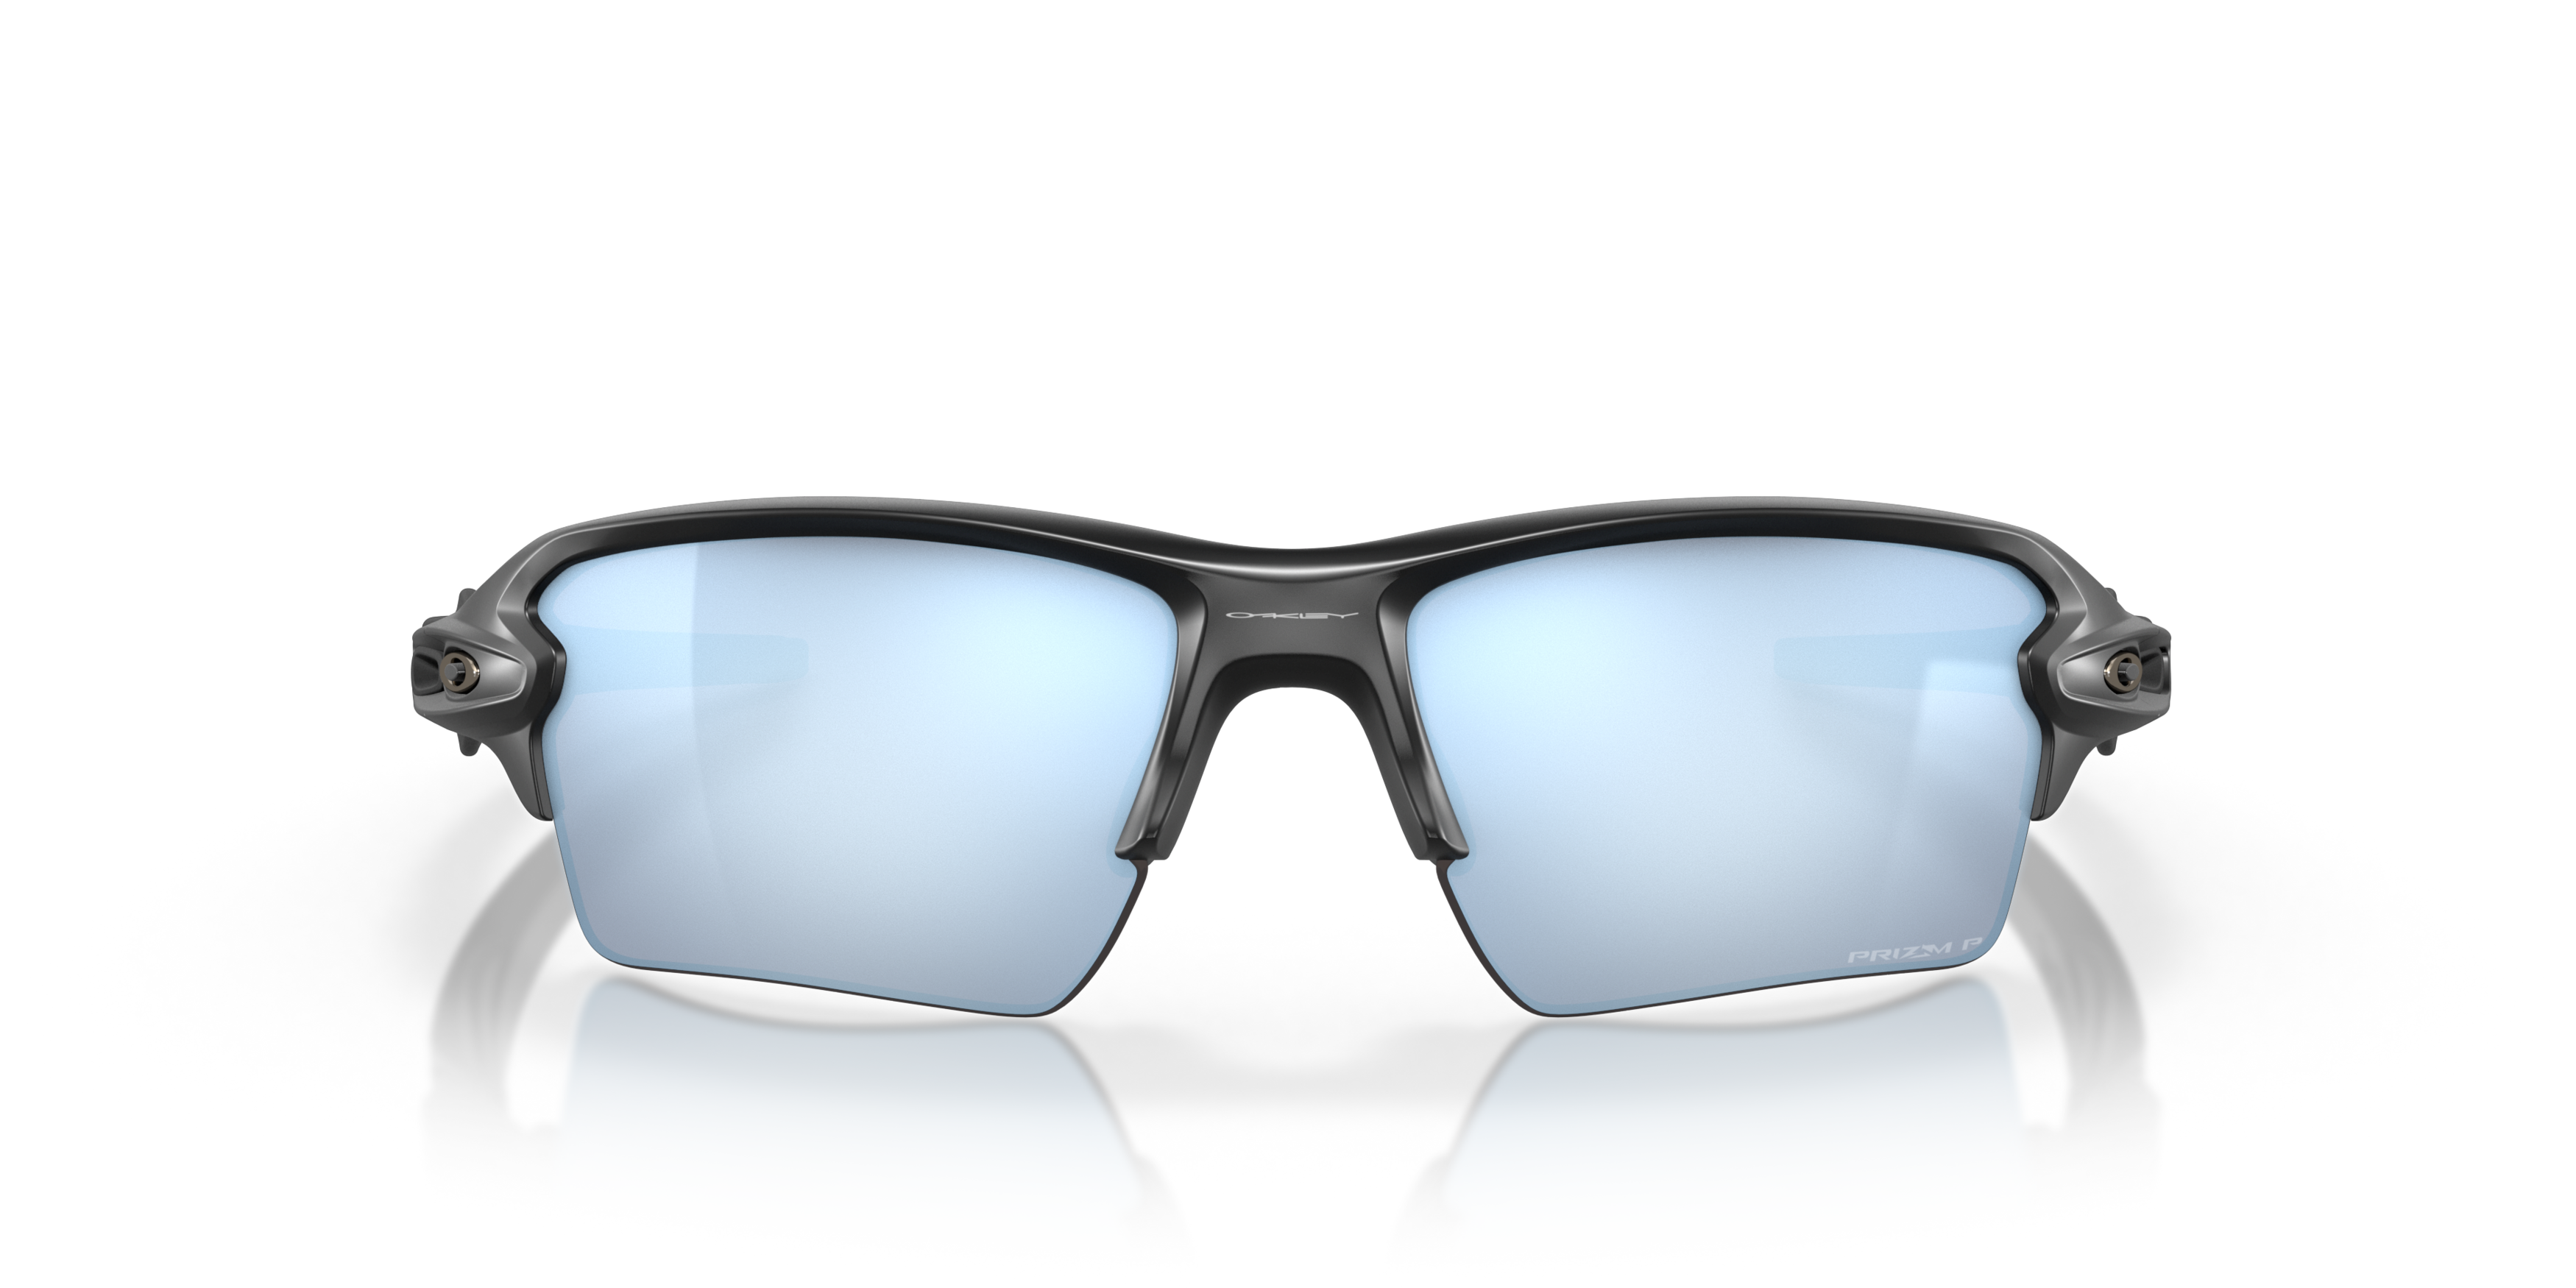 [products.image.front] Oakley 0OO9188 918858